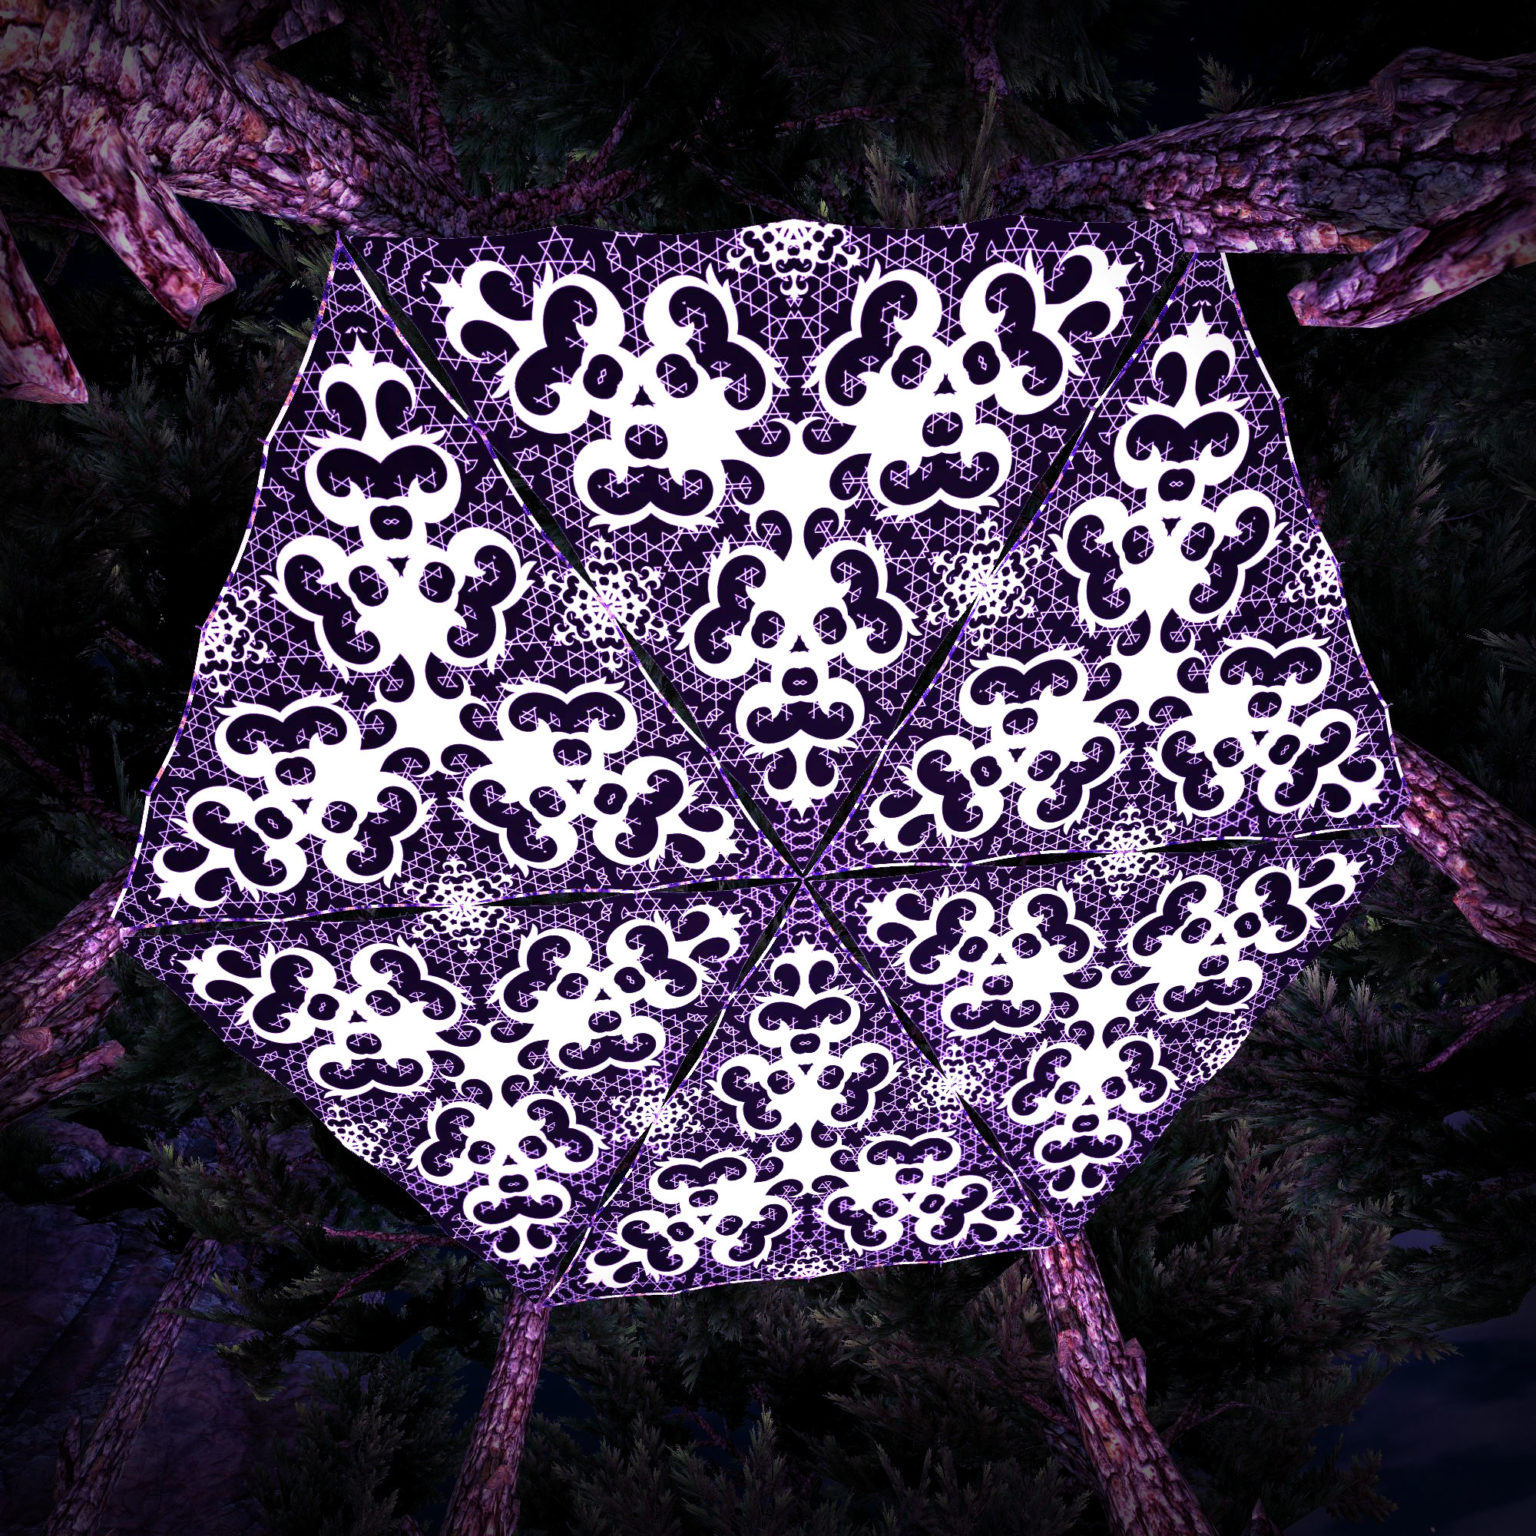 Winter Tale - WT-BW-TR01 - Psychedelic Black&White Ceiling Decoration Canopy 6 Triangles - 3D-Preview